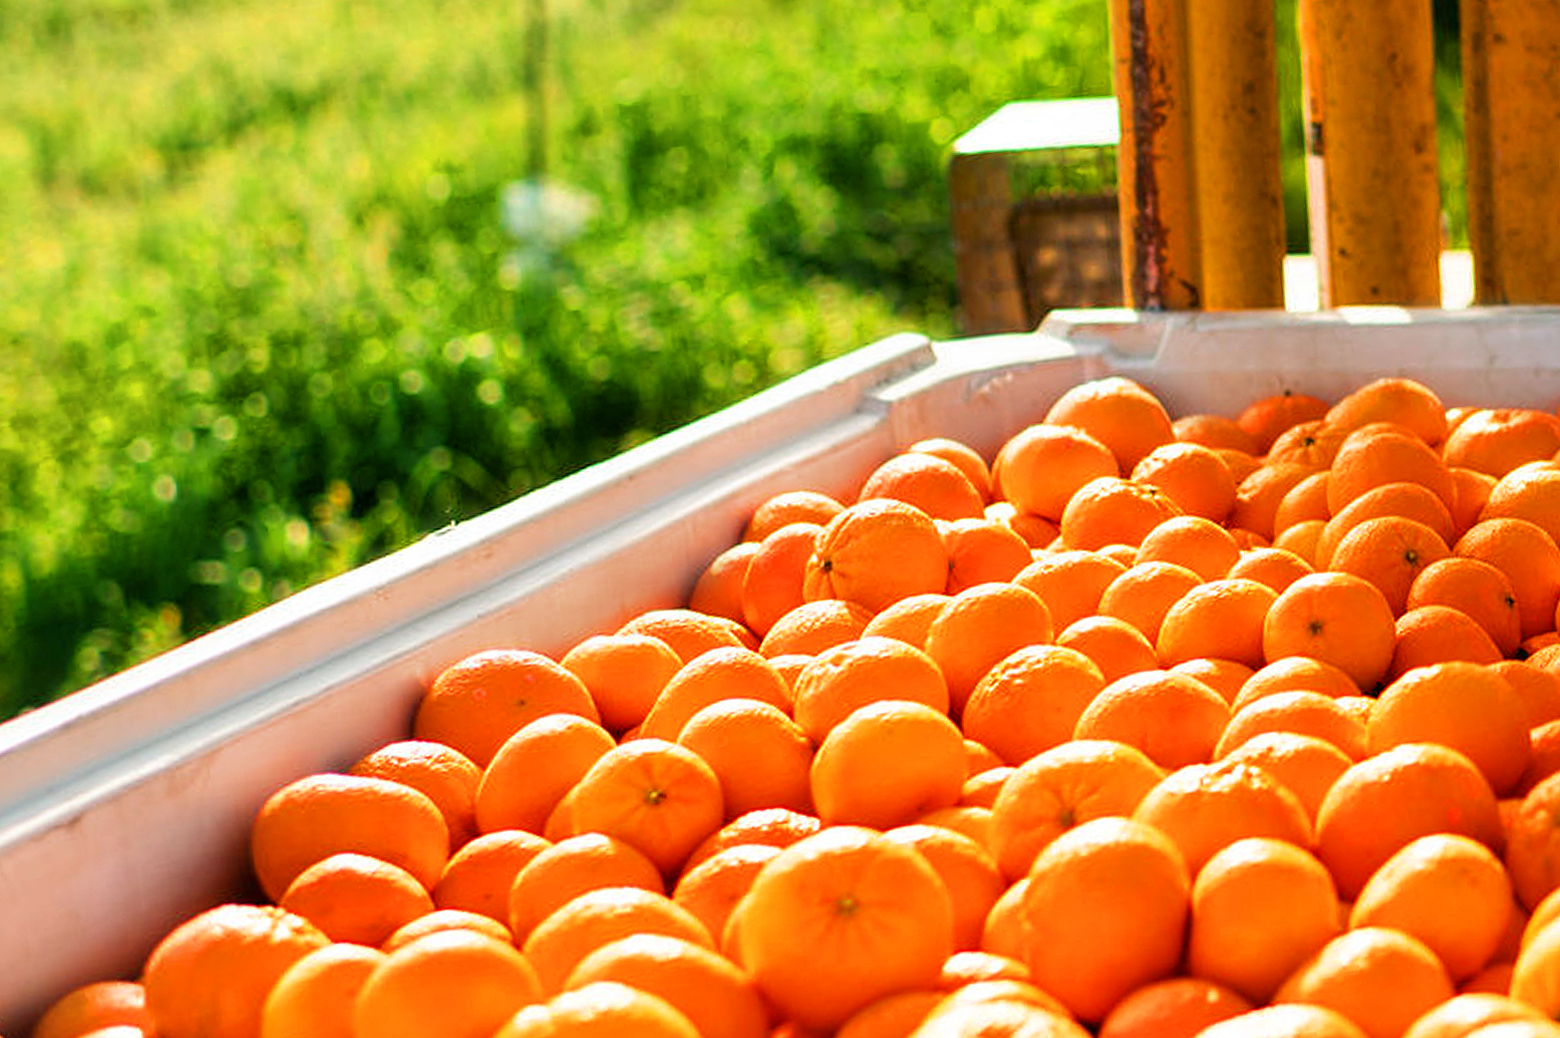 A large container of clementines outside near a field